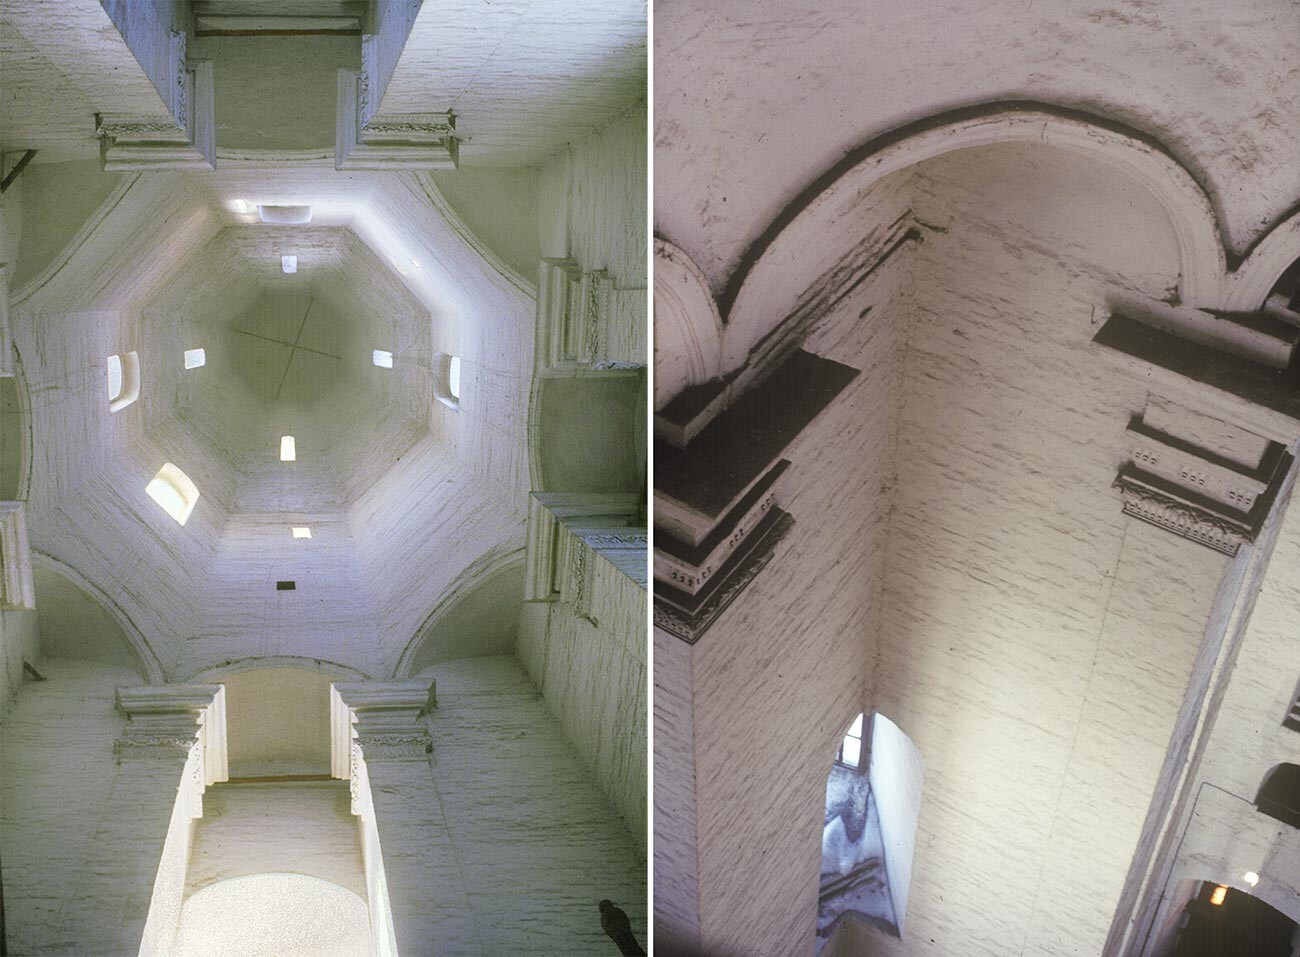 Left: Church of the Ascension, interior. View toward the top of tower. January 13, 1984
Rigth: Renaissance capitals on top of corner pilasters. View taken from 